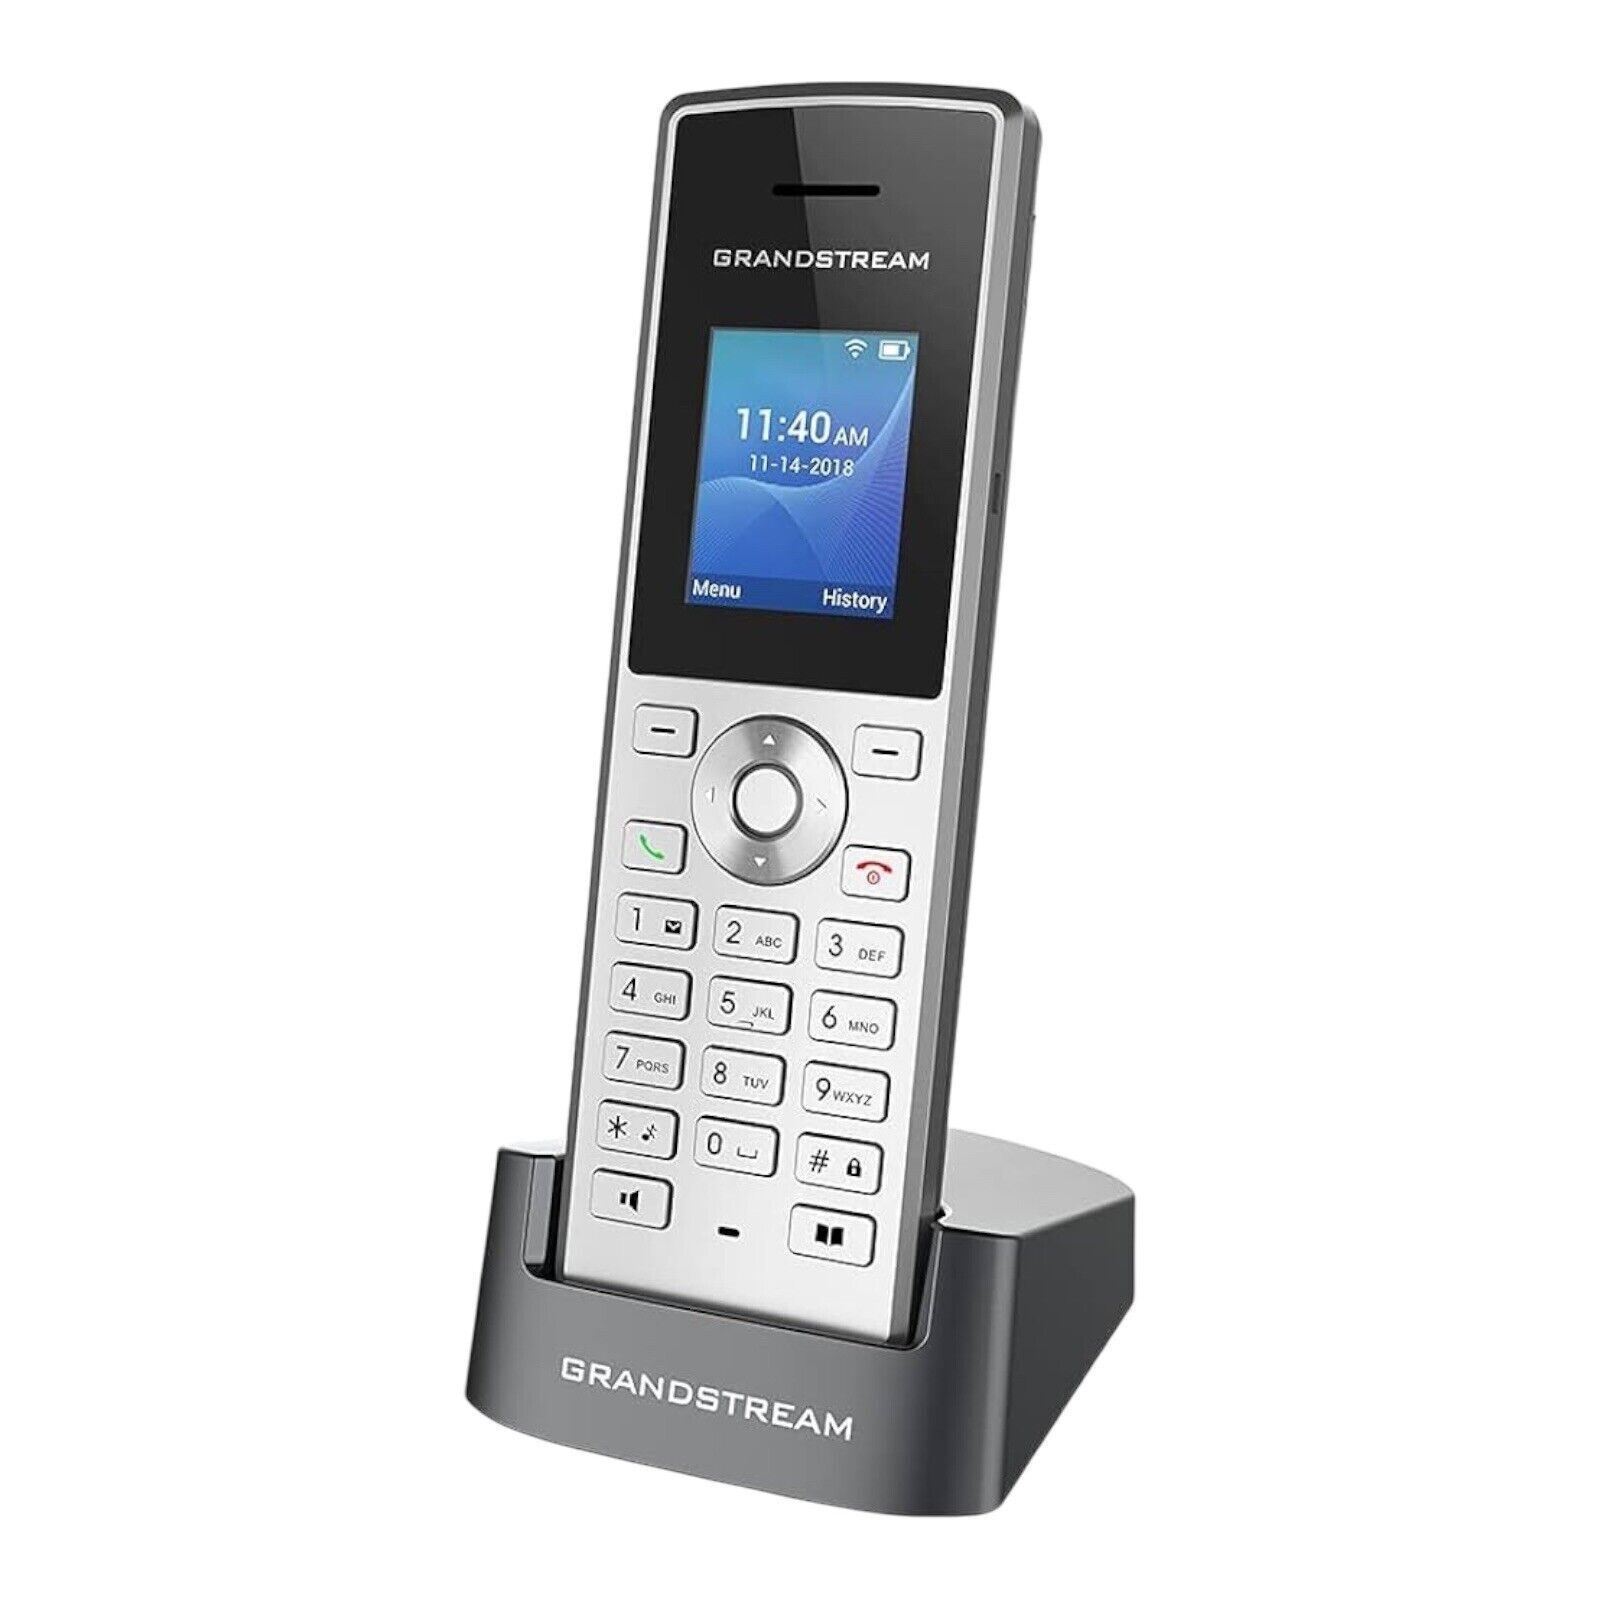 GS-WP810 Portable WiFi Phone by Grandstream